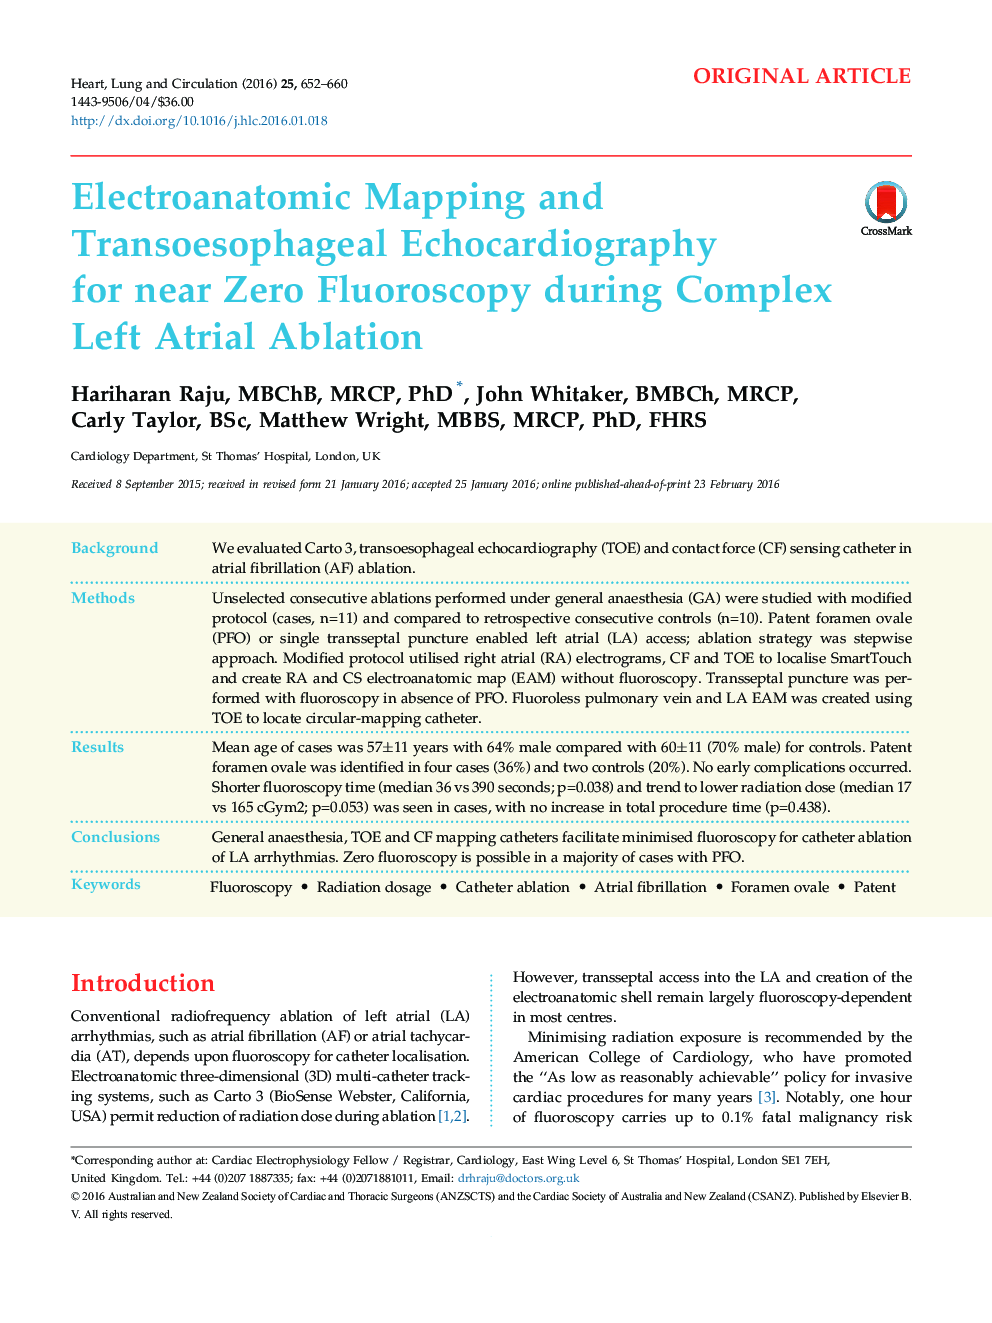 Electroanatomic Mapping and Transoesophageal Echocardiography for near Zero Fluoroscopy during Complex Left Atrial Ablation